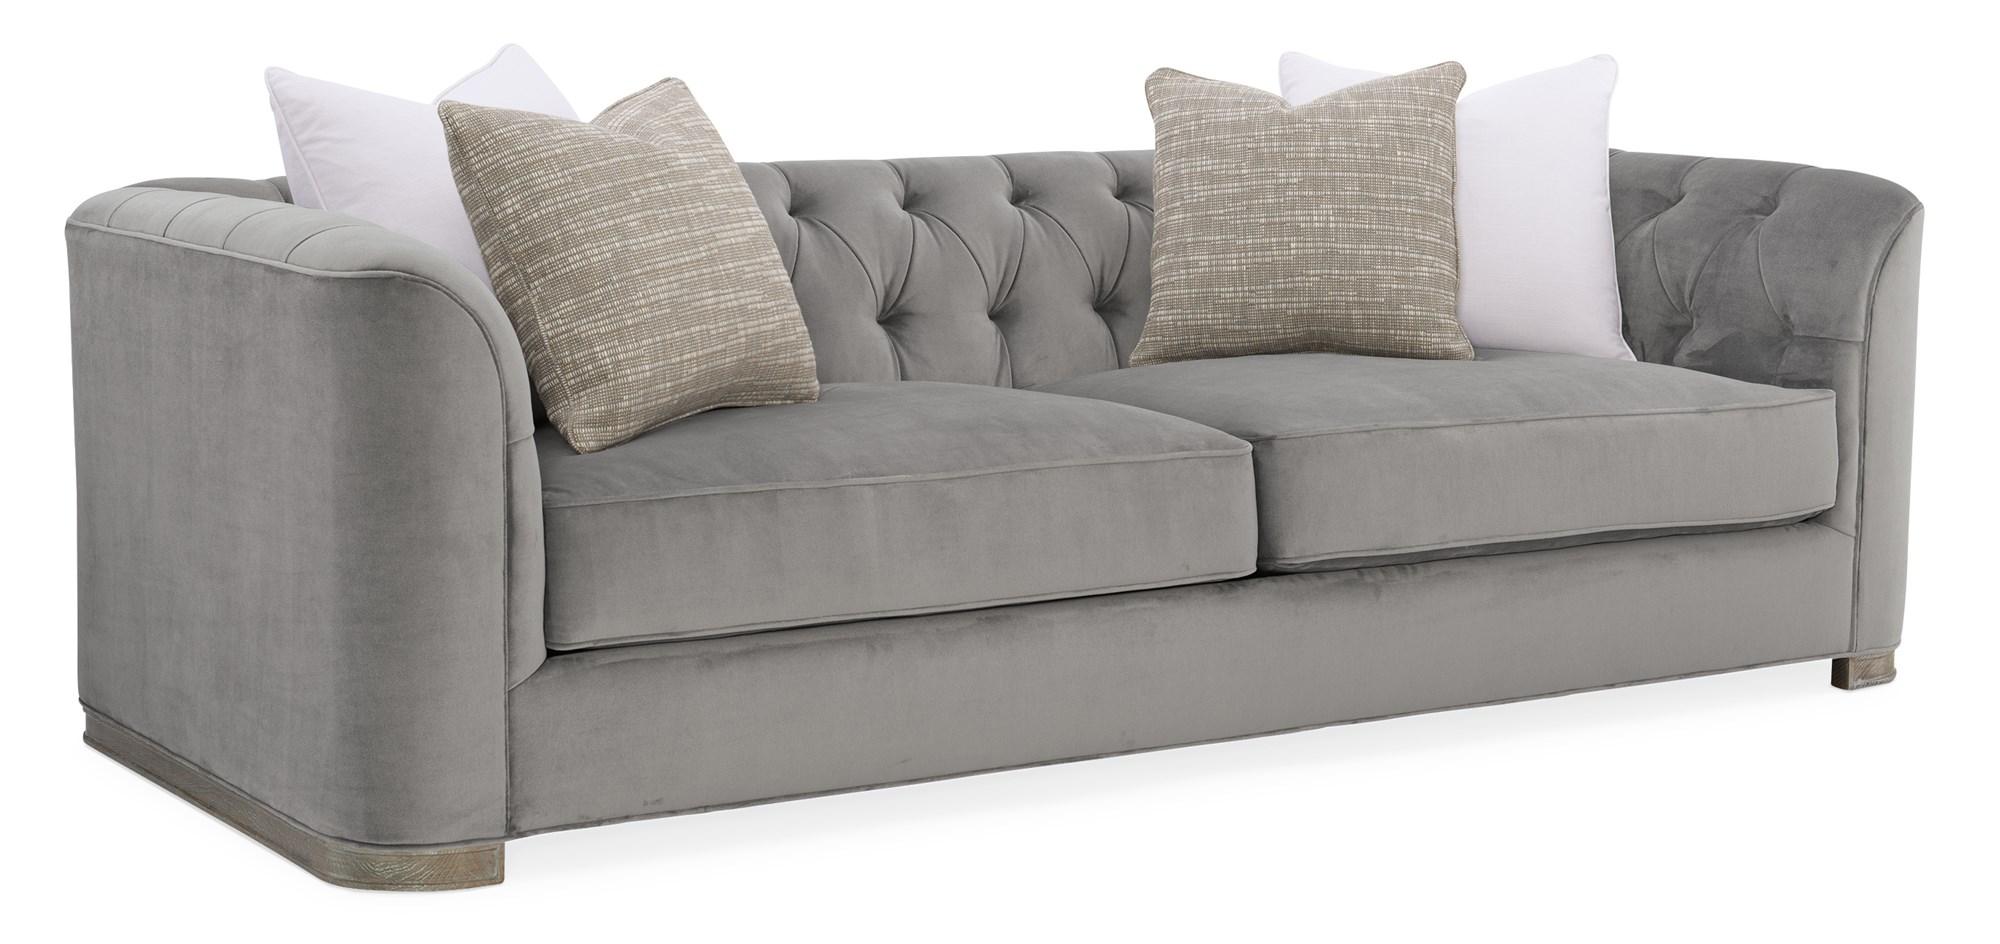 Contemporary Sofa TUFT GUY UPH-019-013-A in Driftwood, Gray Linen